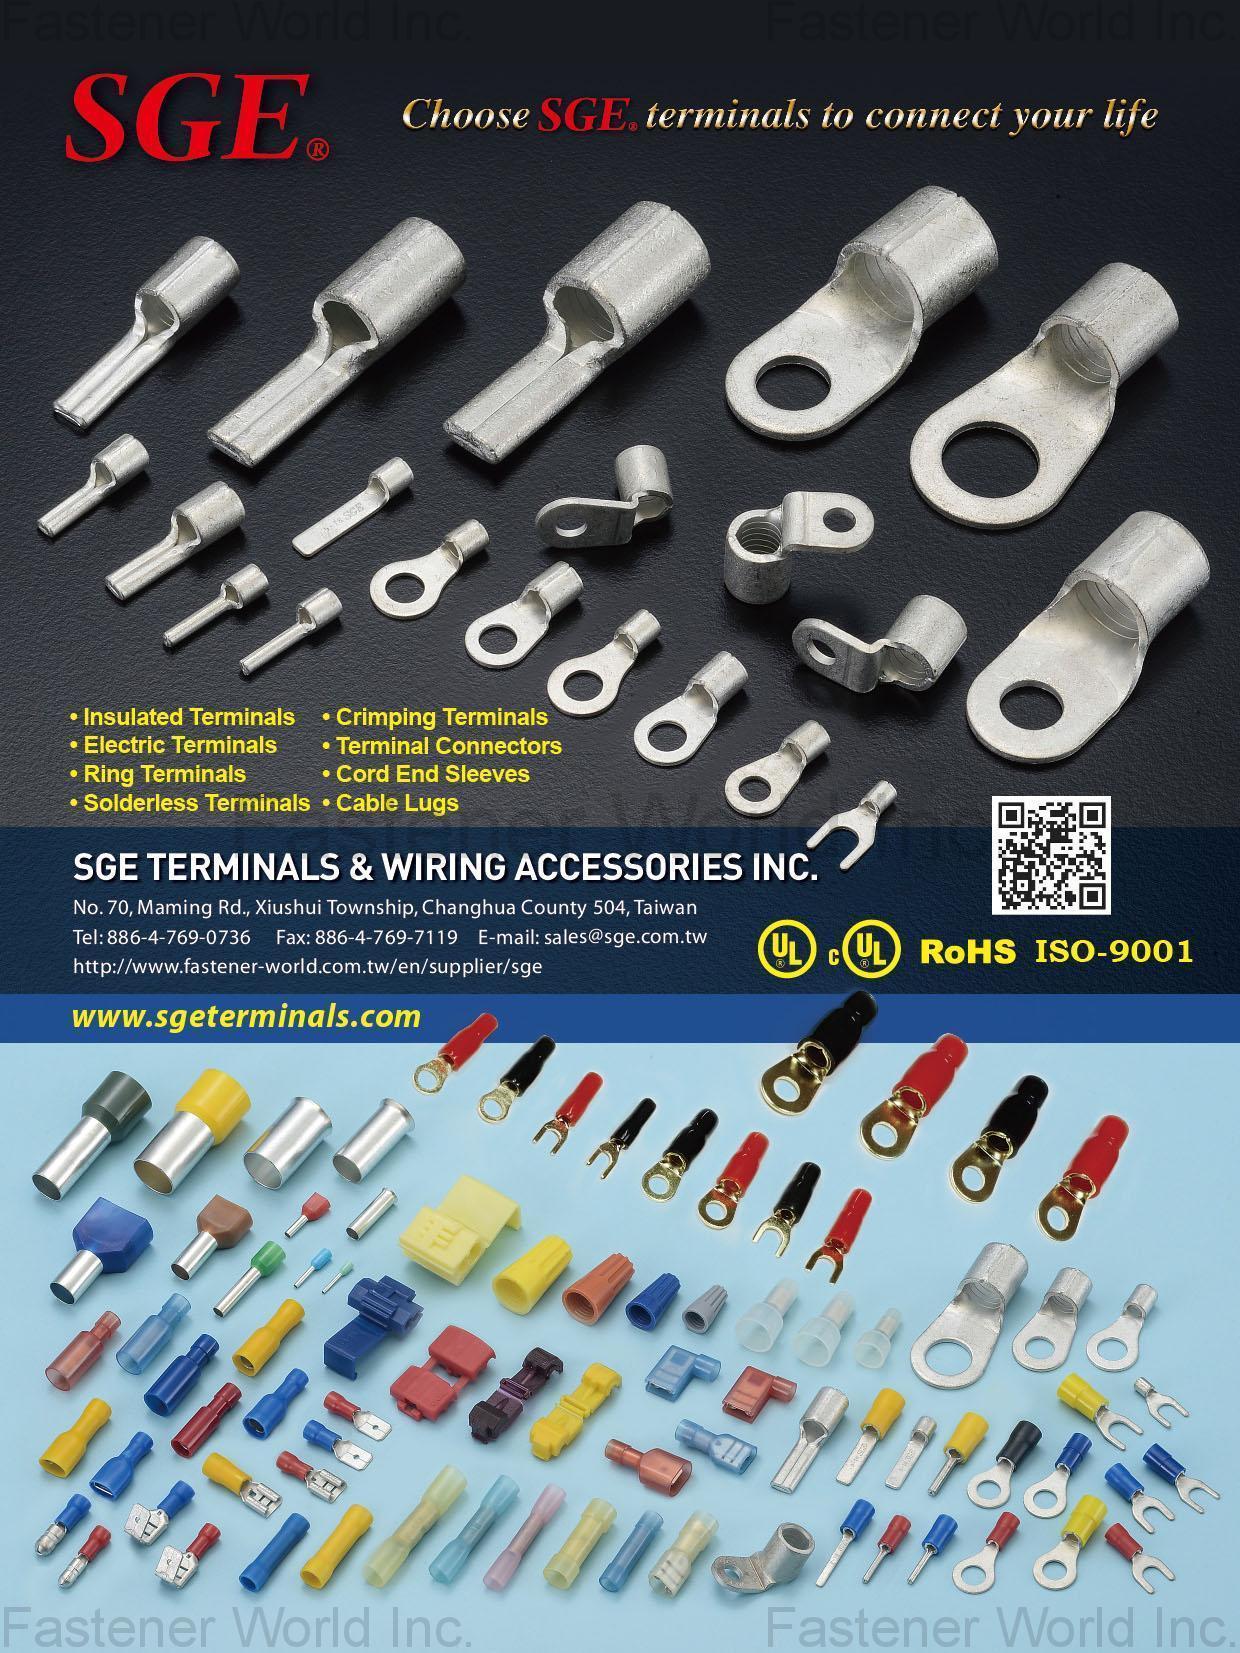 SGE TERMINALS & WIRING ACCESSORIES INC. , Insulated Terminals, Electric Terminals, Ring Terminals, Solderless Terminals, Crimping Terminals, Terminal Connectors, Cord End Sleeves, Cable Lugs , Terminal Nuts